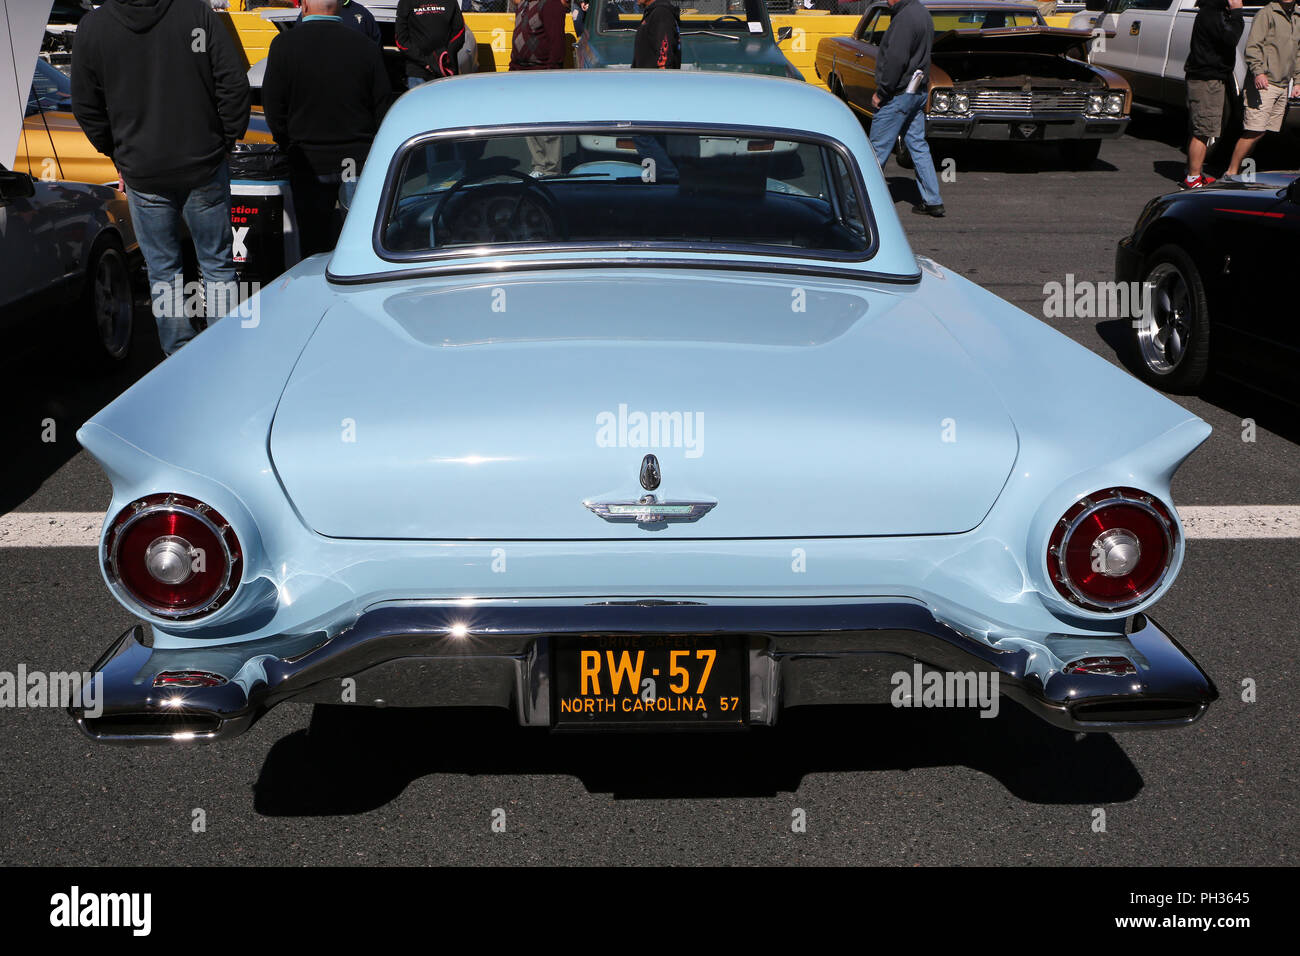 CONCORD, NC — April 8, 2017:  A 1957 Ford Thunderbird automobile on display at the Pennzoil AutoFair classic car show held at Charlotte Motor Speedway. Stock Photo